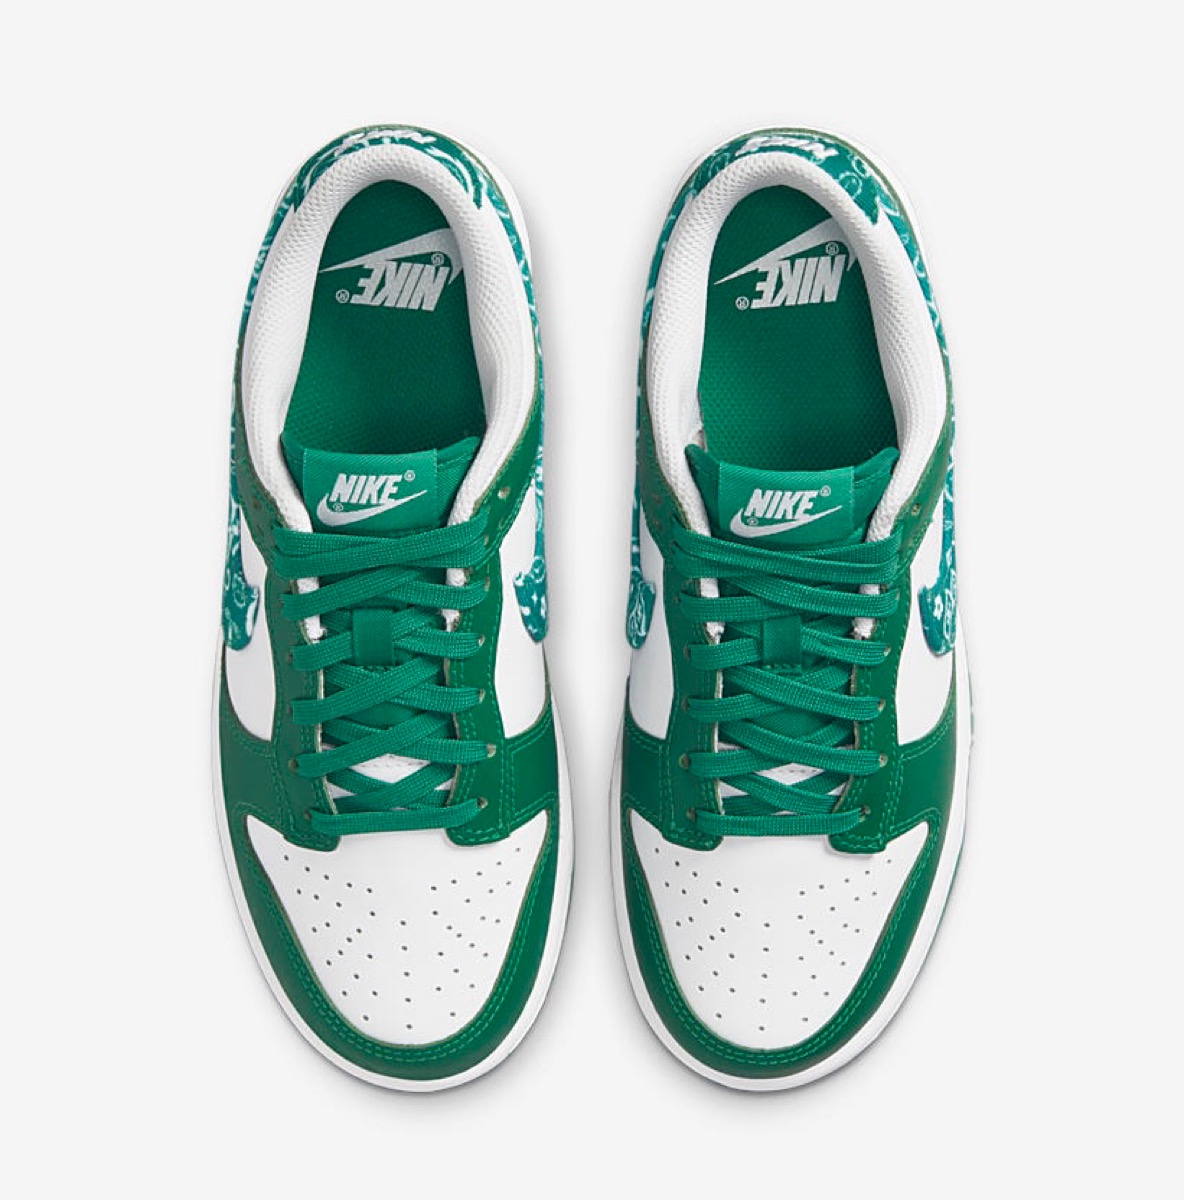 Nike Wmns Dunk Low ESS “Green Paisley”が2022年2月14日に発売予定 | UP TO DATE